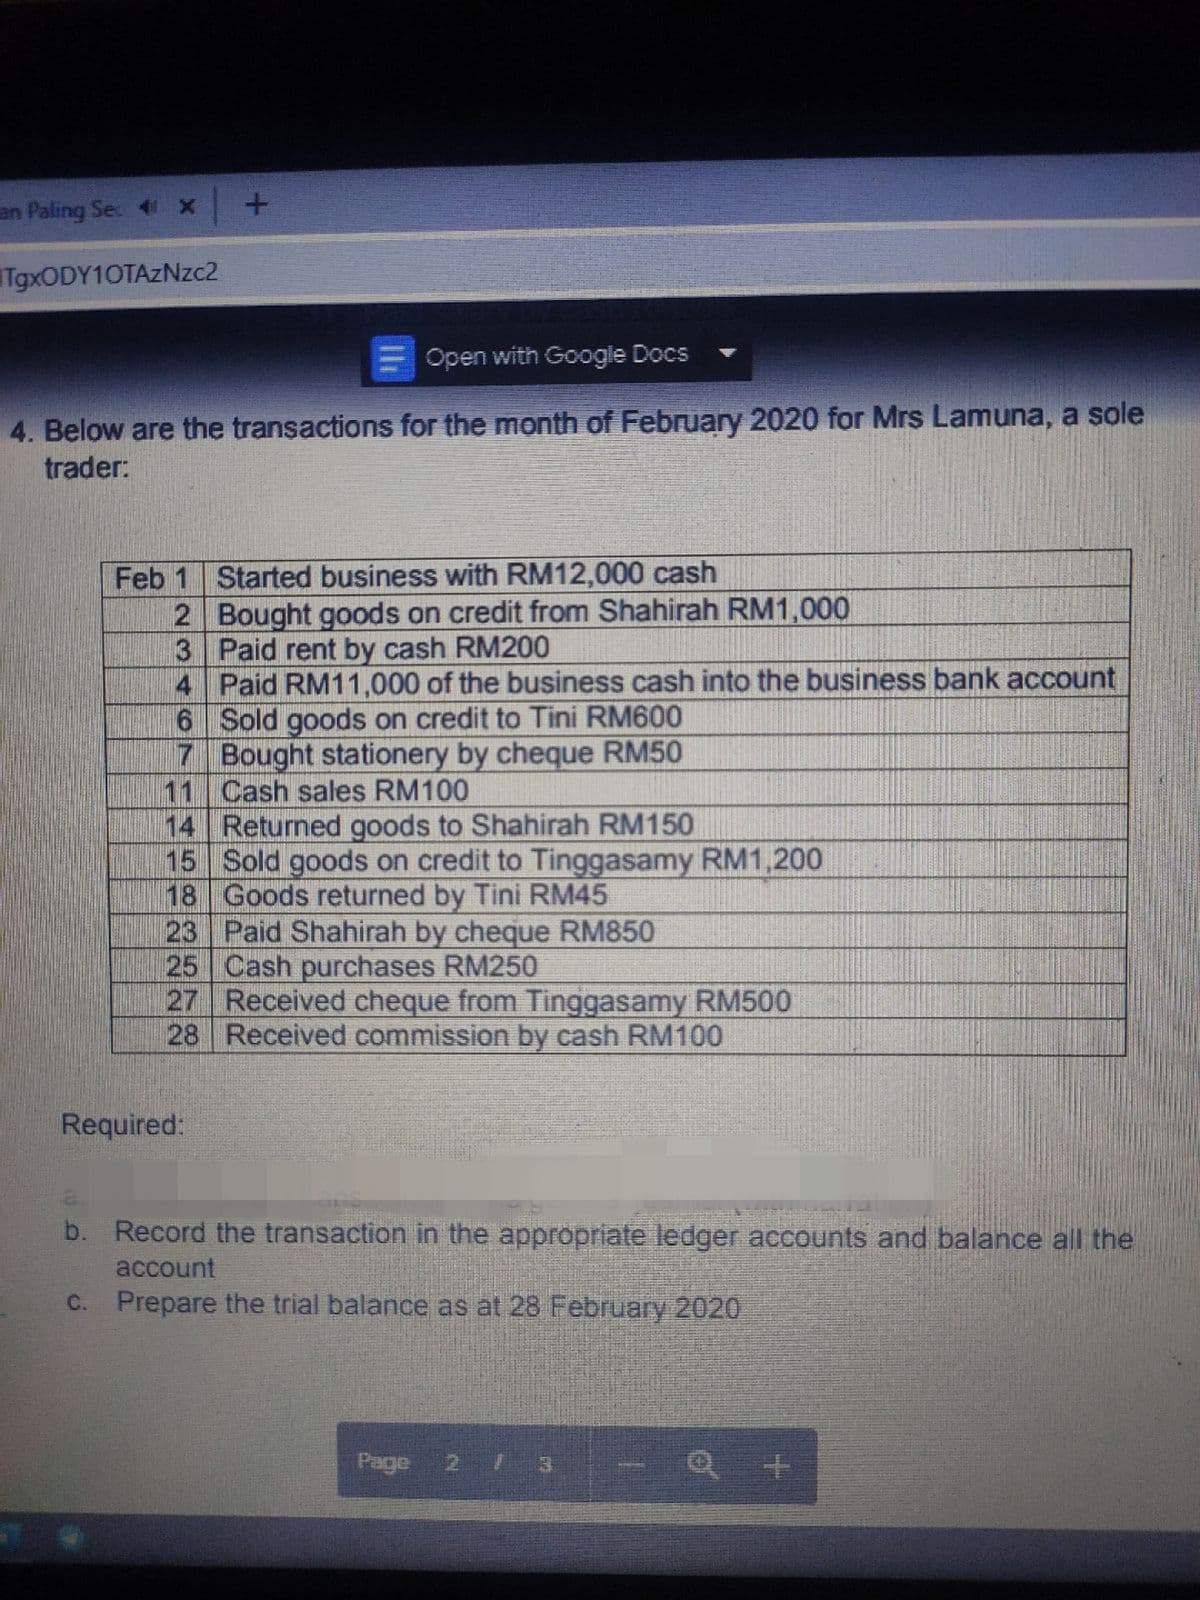 en Paling Se 4 x +
TgxODY10TAzNzc2
Open with Google Docs
4. Below are the transactions for the month of February 2020 for Mrs Lamuna, a sole
trader:
Feb 1 Started business with RM12,000 cash
2 Bought goods on credit from Shahirah RM1,000
3 Paid rent by cash RM200
4 Paid RM11,000 of the business cash into the business bank account
6 Sold goods on credit to Tini RM600
7 Bought stationery by cheque RM50
11 Cash sales RM100
14 Returned goods to Shahirah RM150
15 Sold goods on credit to Tinggasamy RM1,200
18 Goods returned by Tini RM45
23 Paid Shahirah by cheque RM850
25 Cash purchases RM250
27 Received cheque from Tinggasamy RM500
28 Received commission by cash RM100
Required:
ans
b. Record the transaction in the appropriate ledger accounts and balance all the
account
c. Prepare the trial balance as at 28 February 2020
Page 2 3 -Q +
